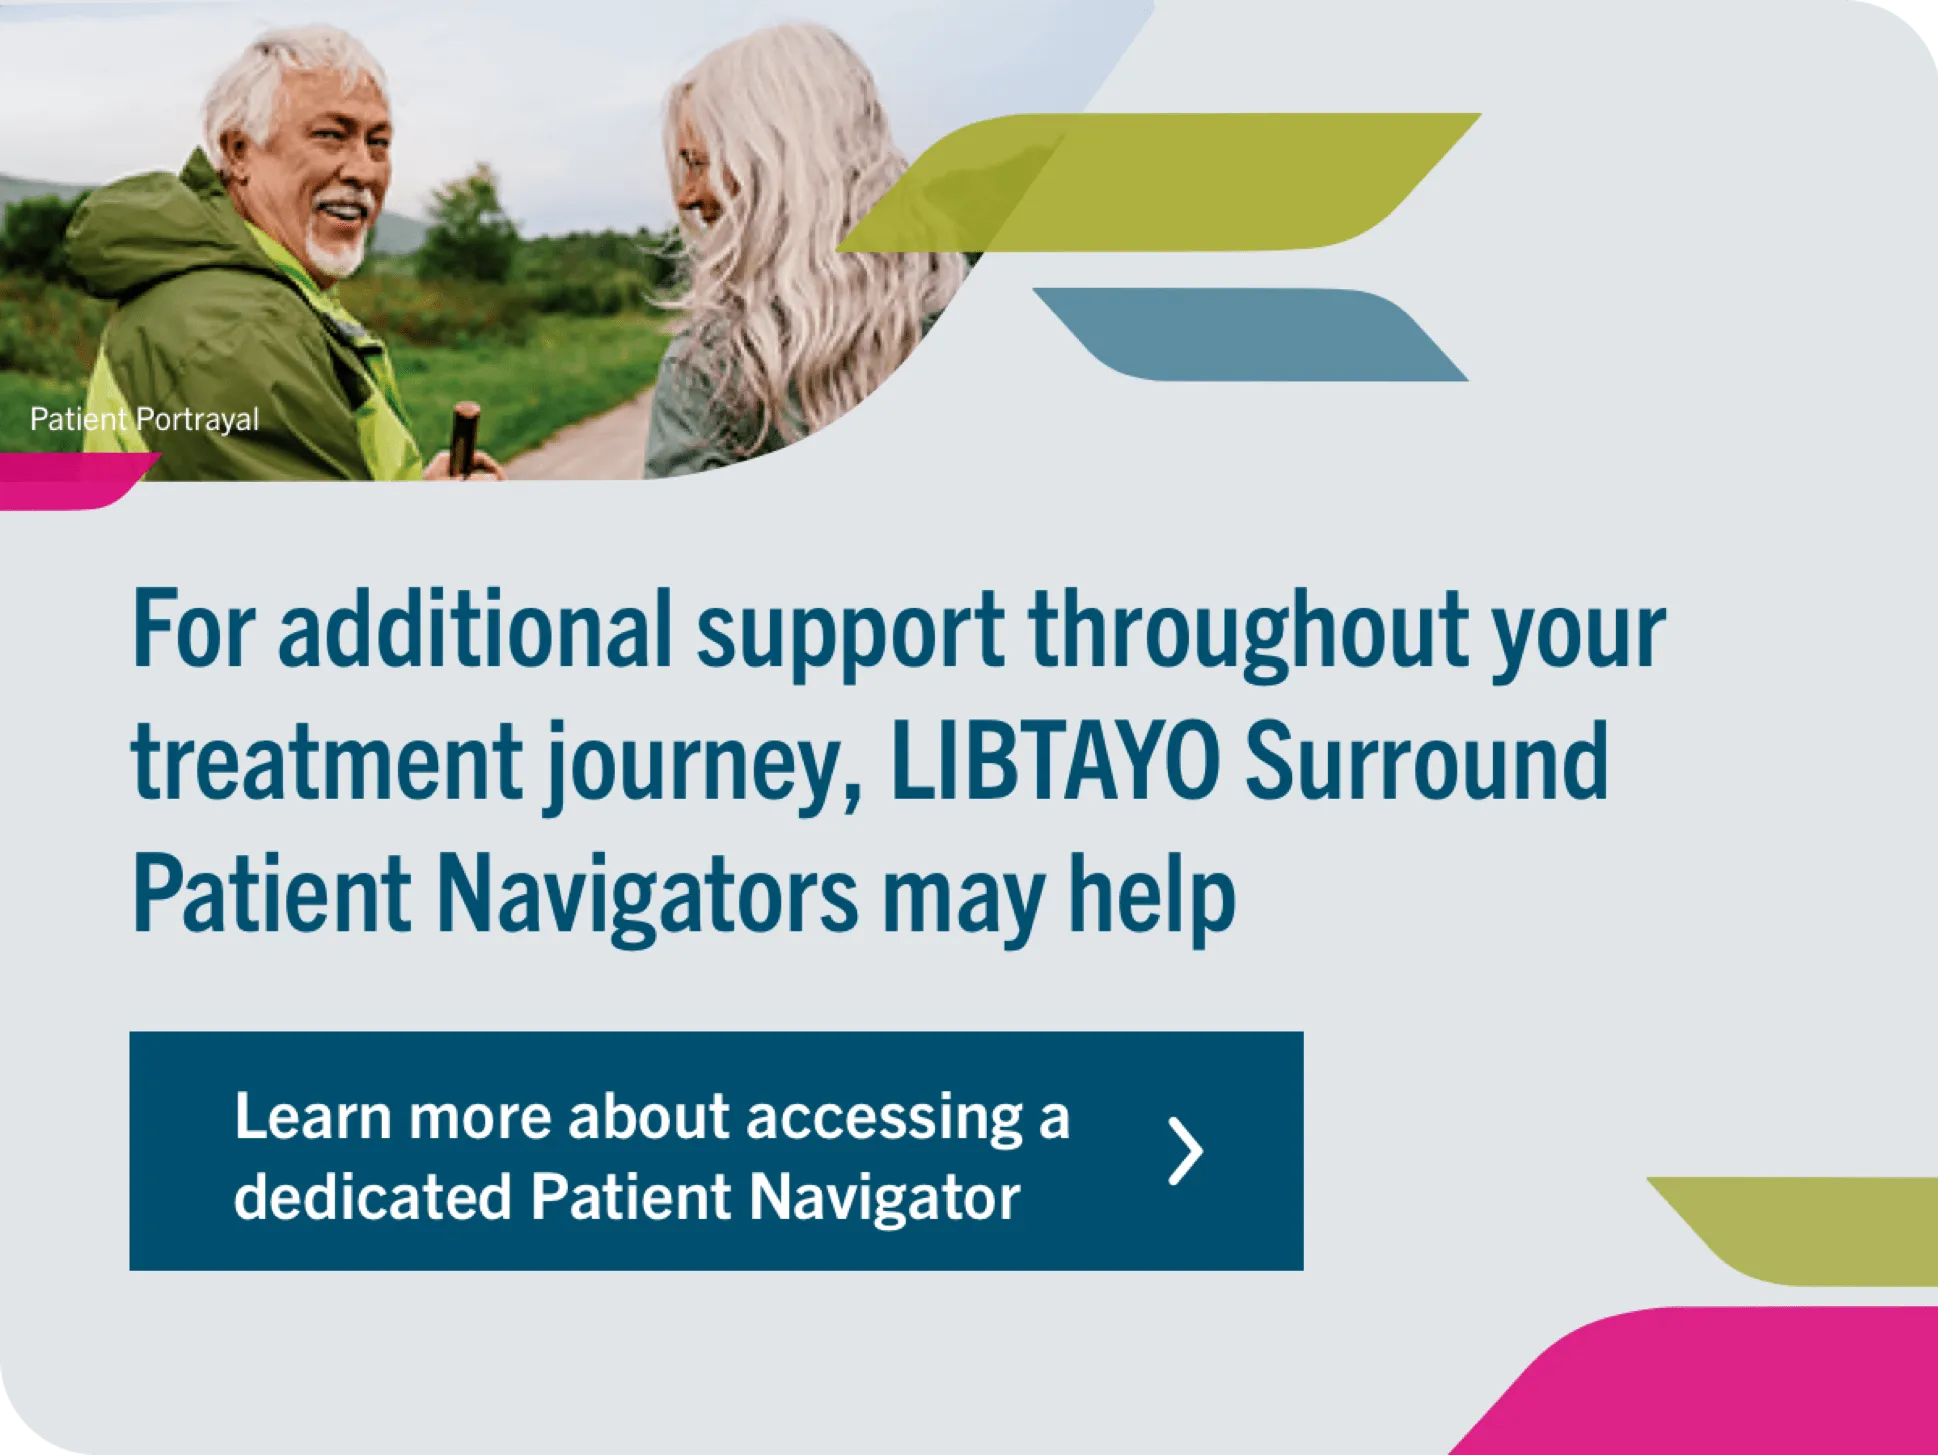 Learn more about accessing a dedicated Patient Navigator